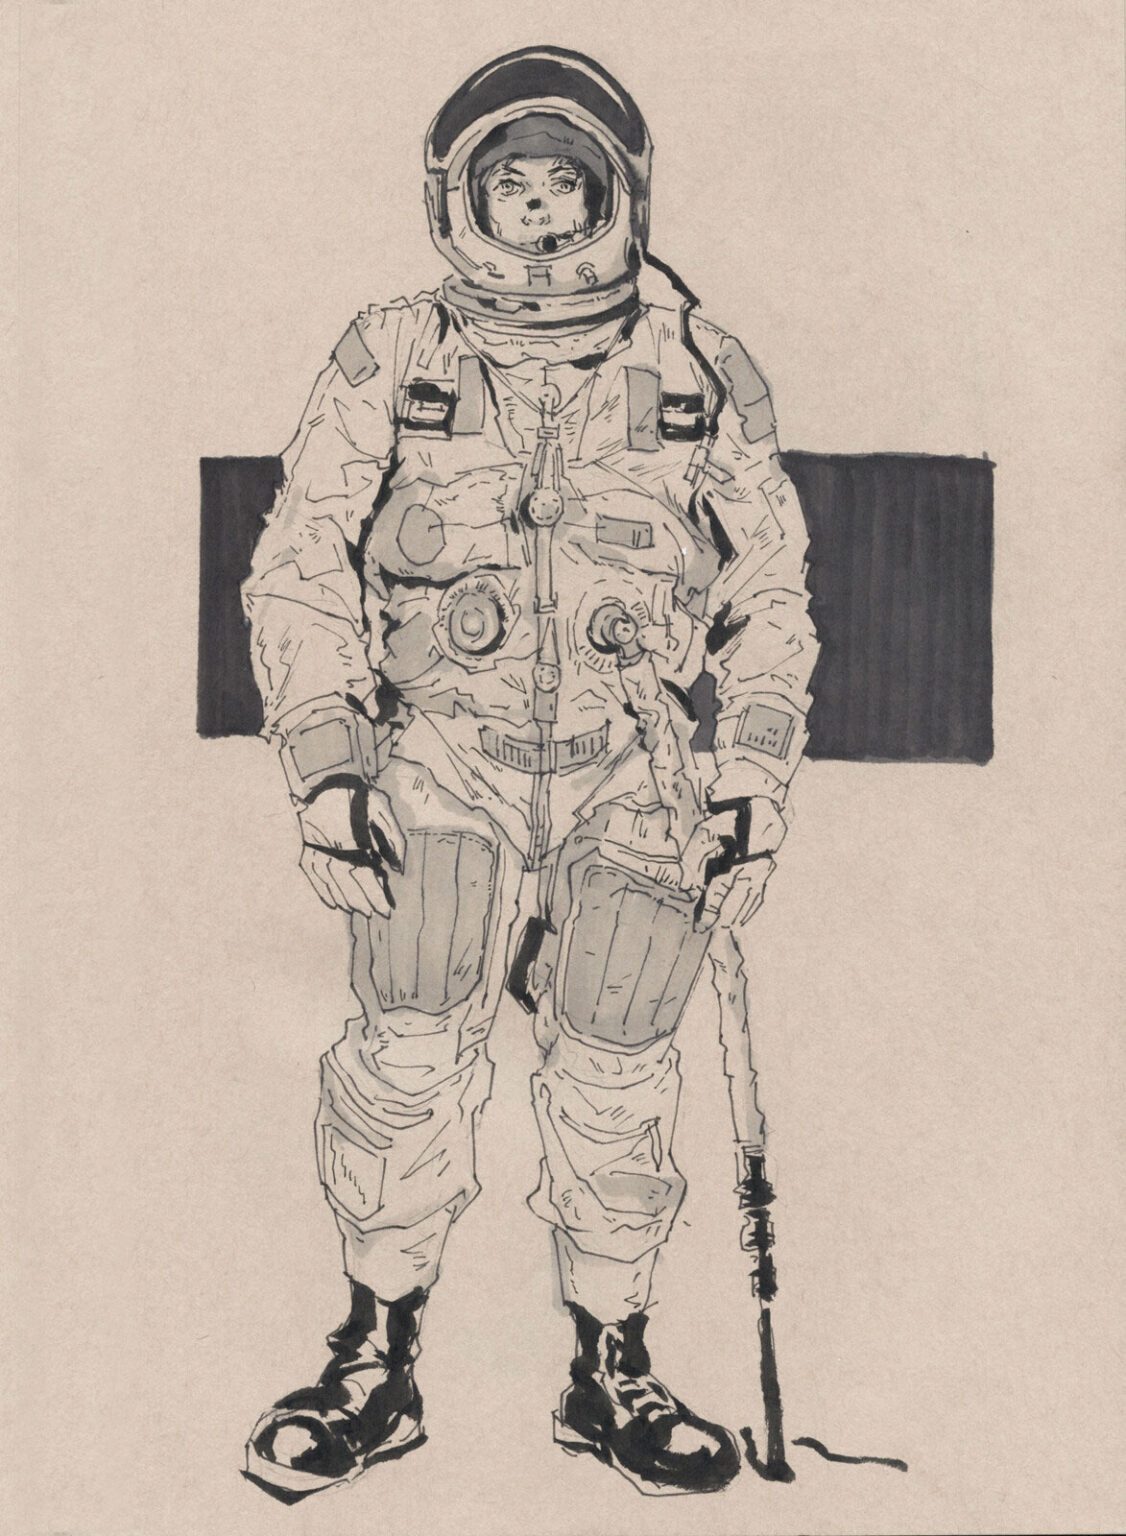 Astronaut Drawing Reference and Sketches for Artists